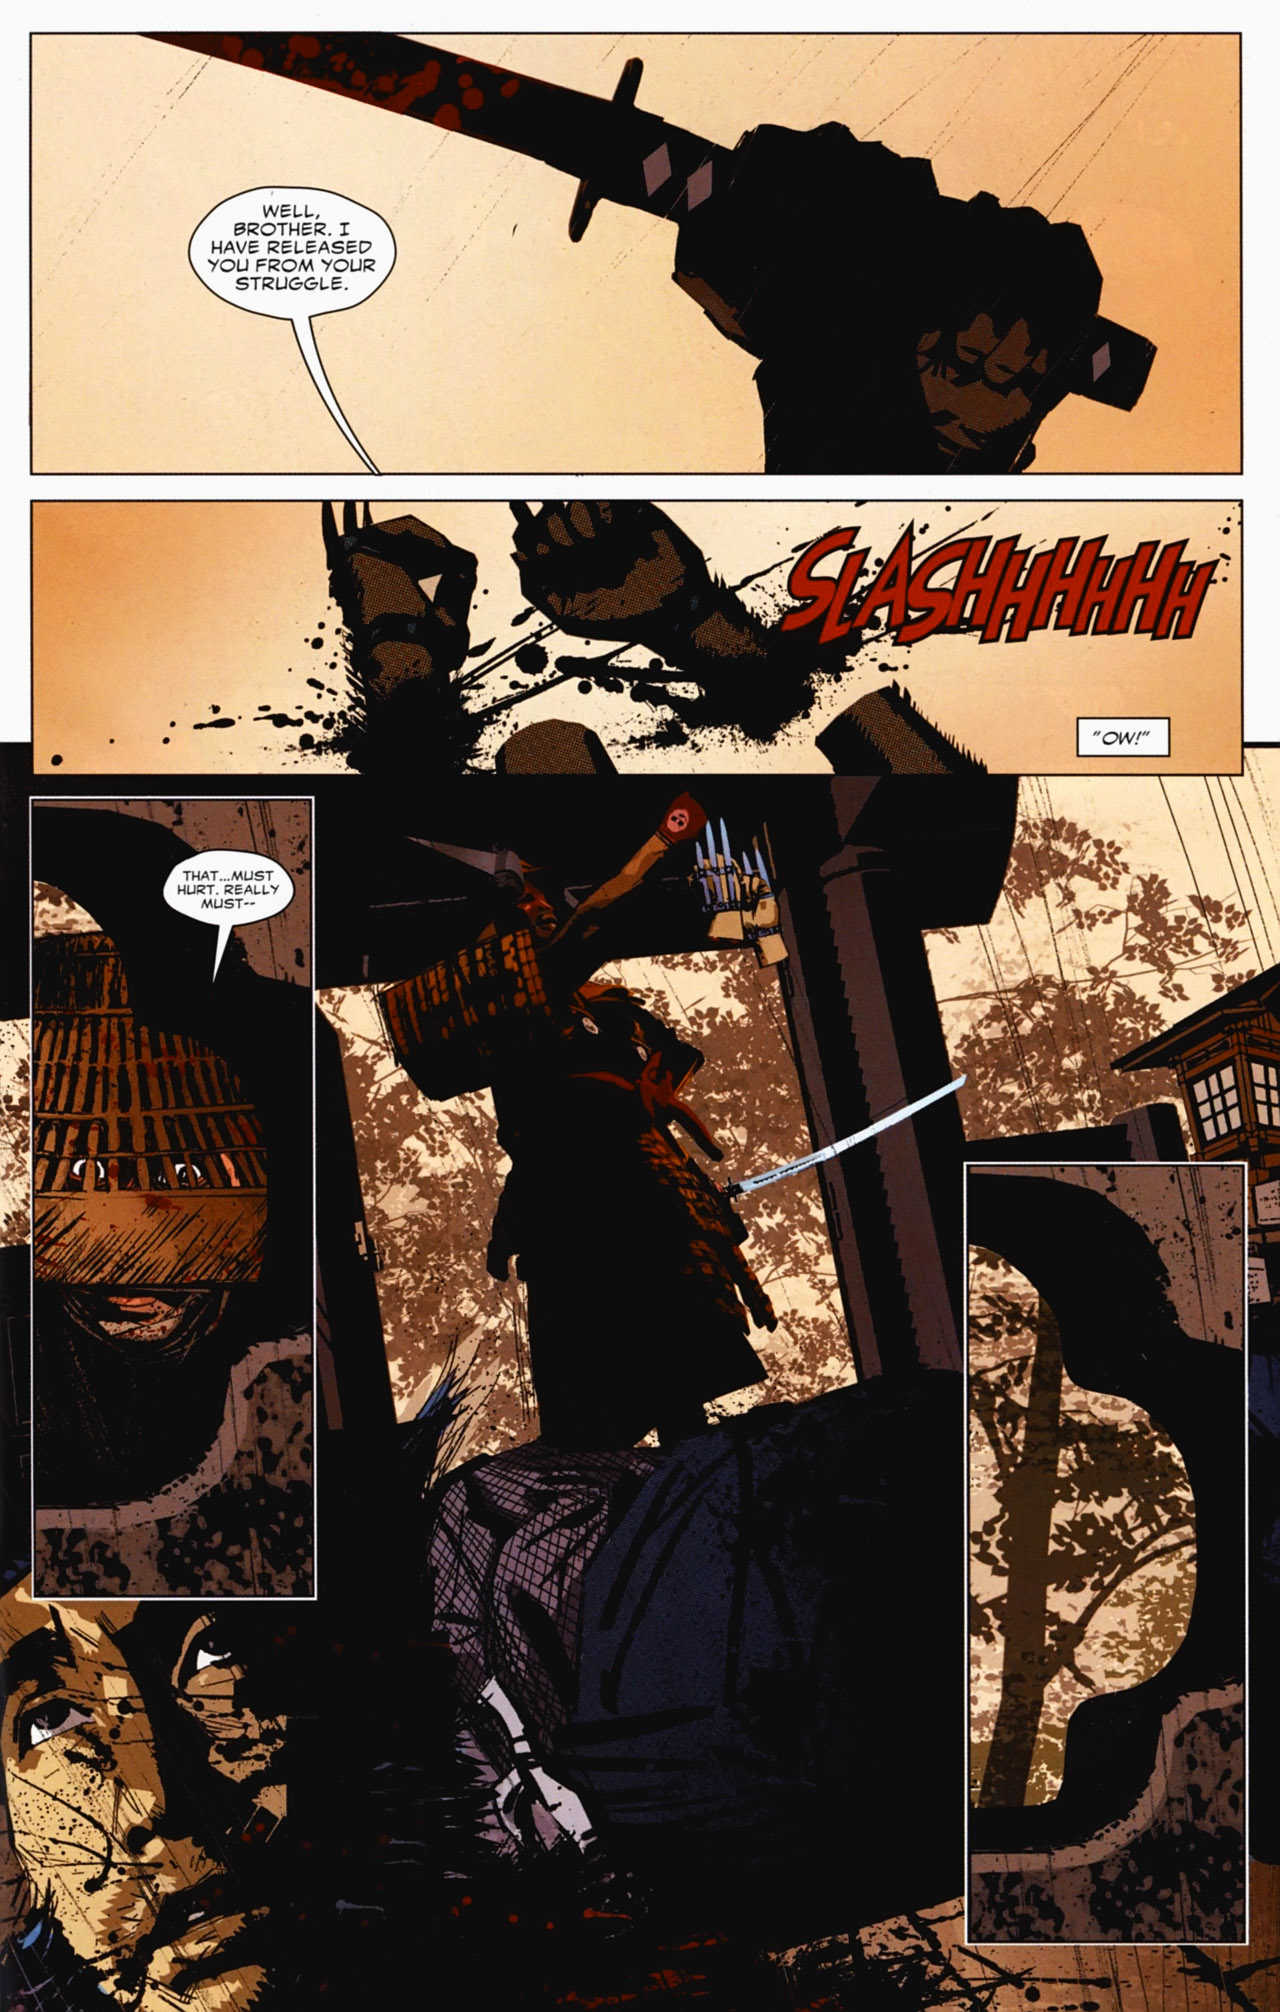 5 Ronin #1 - Chapter One: The Way Of The One - Wolverine